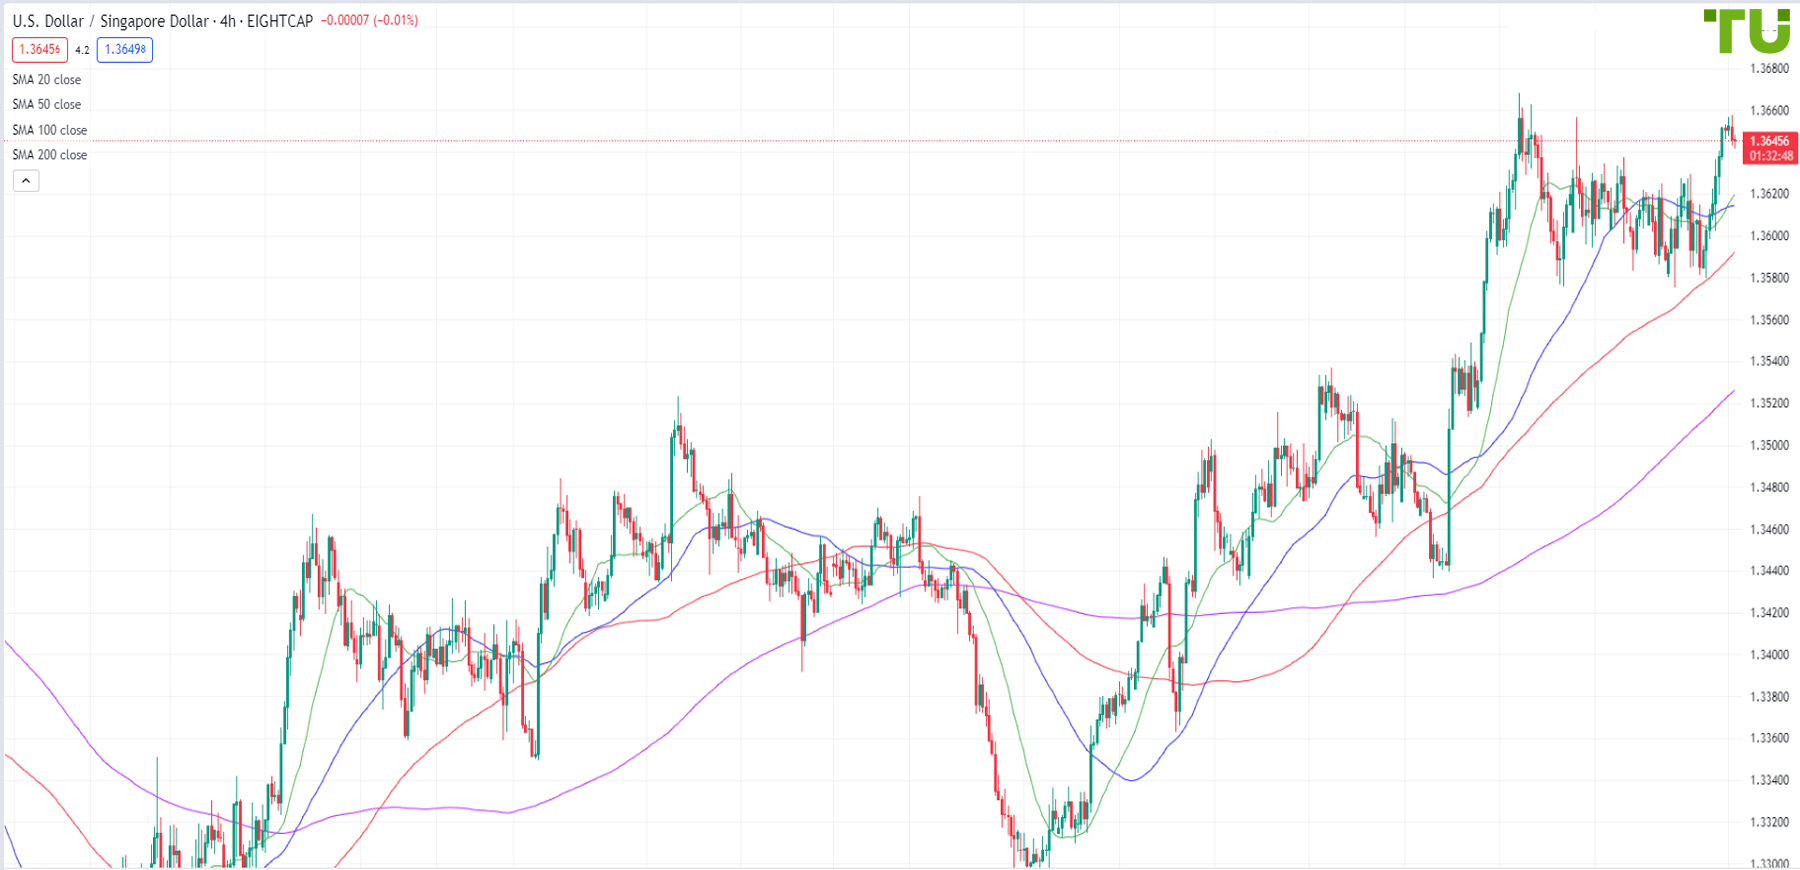 USD/SGD is testing 1.3655 resistance